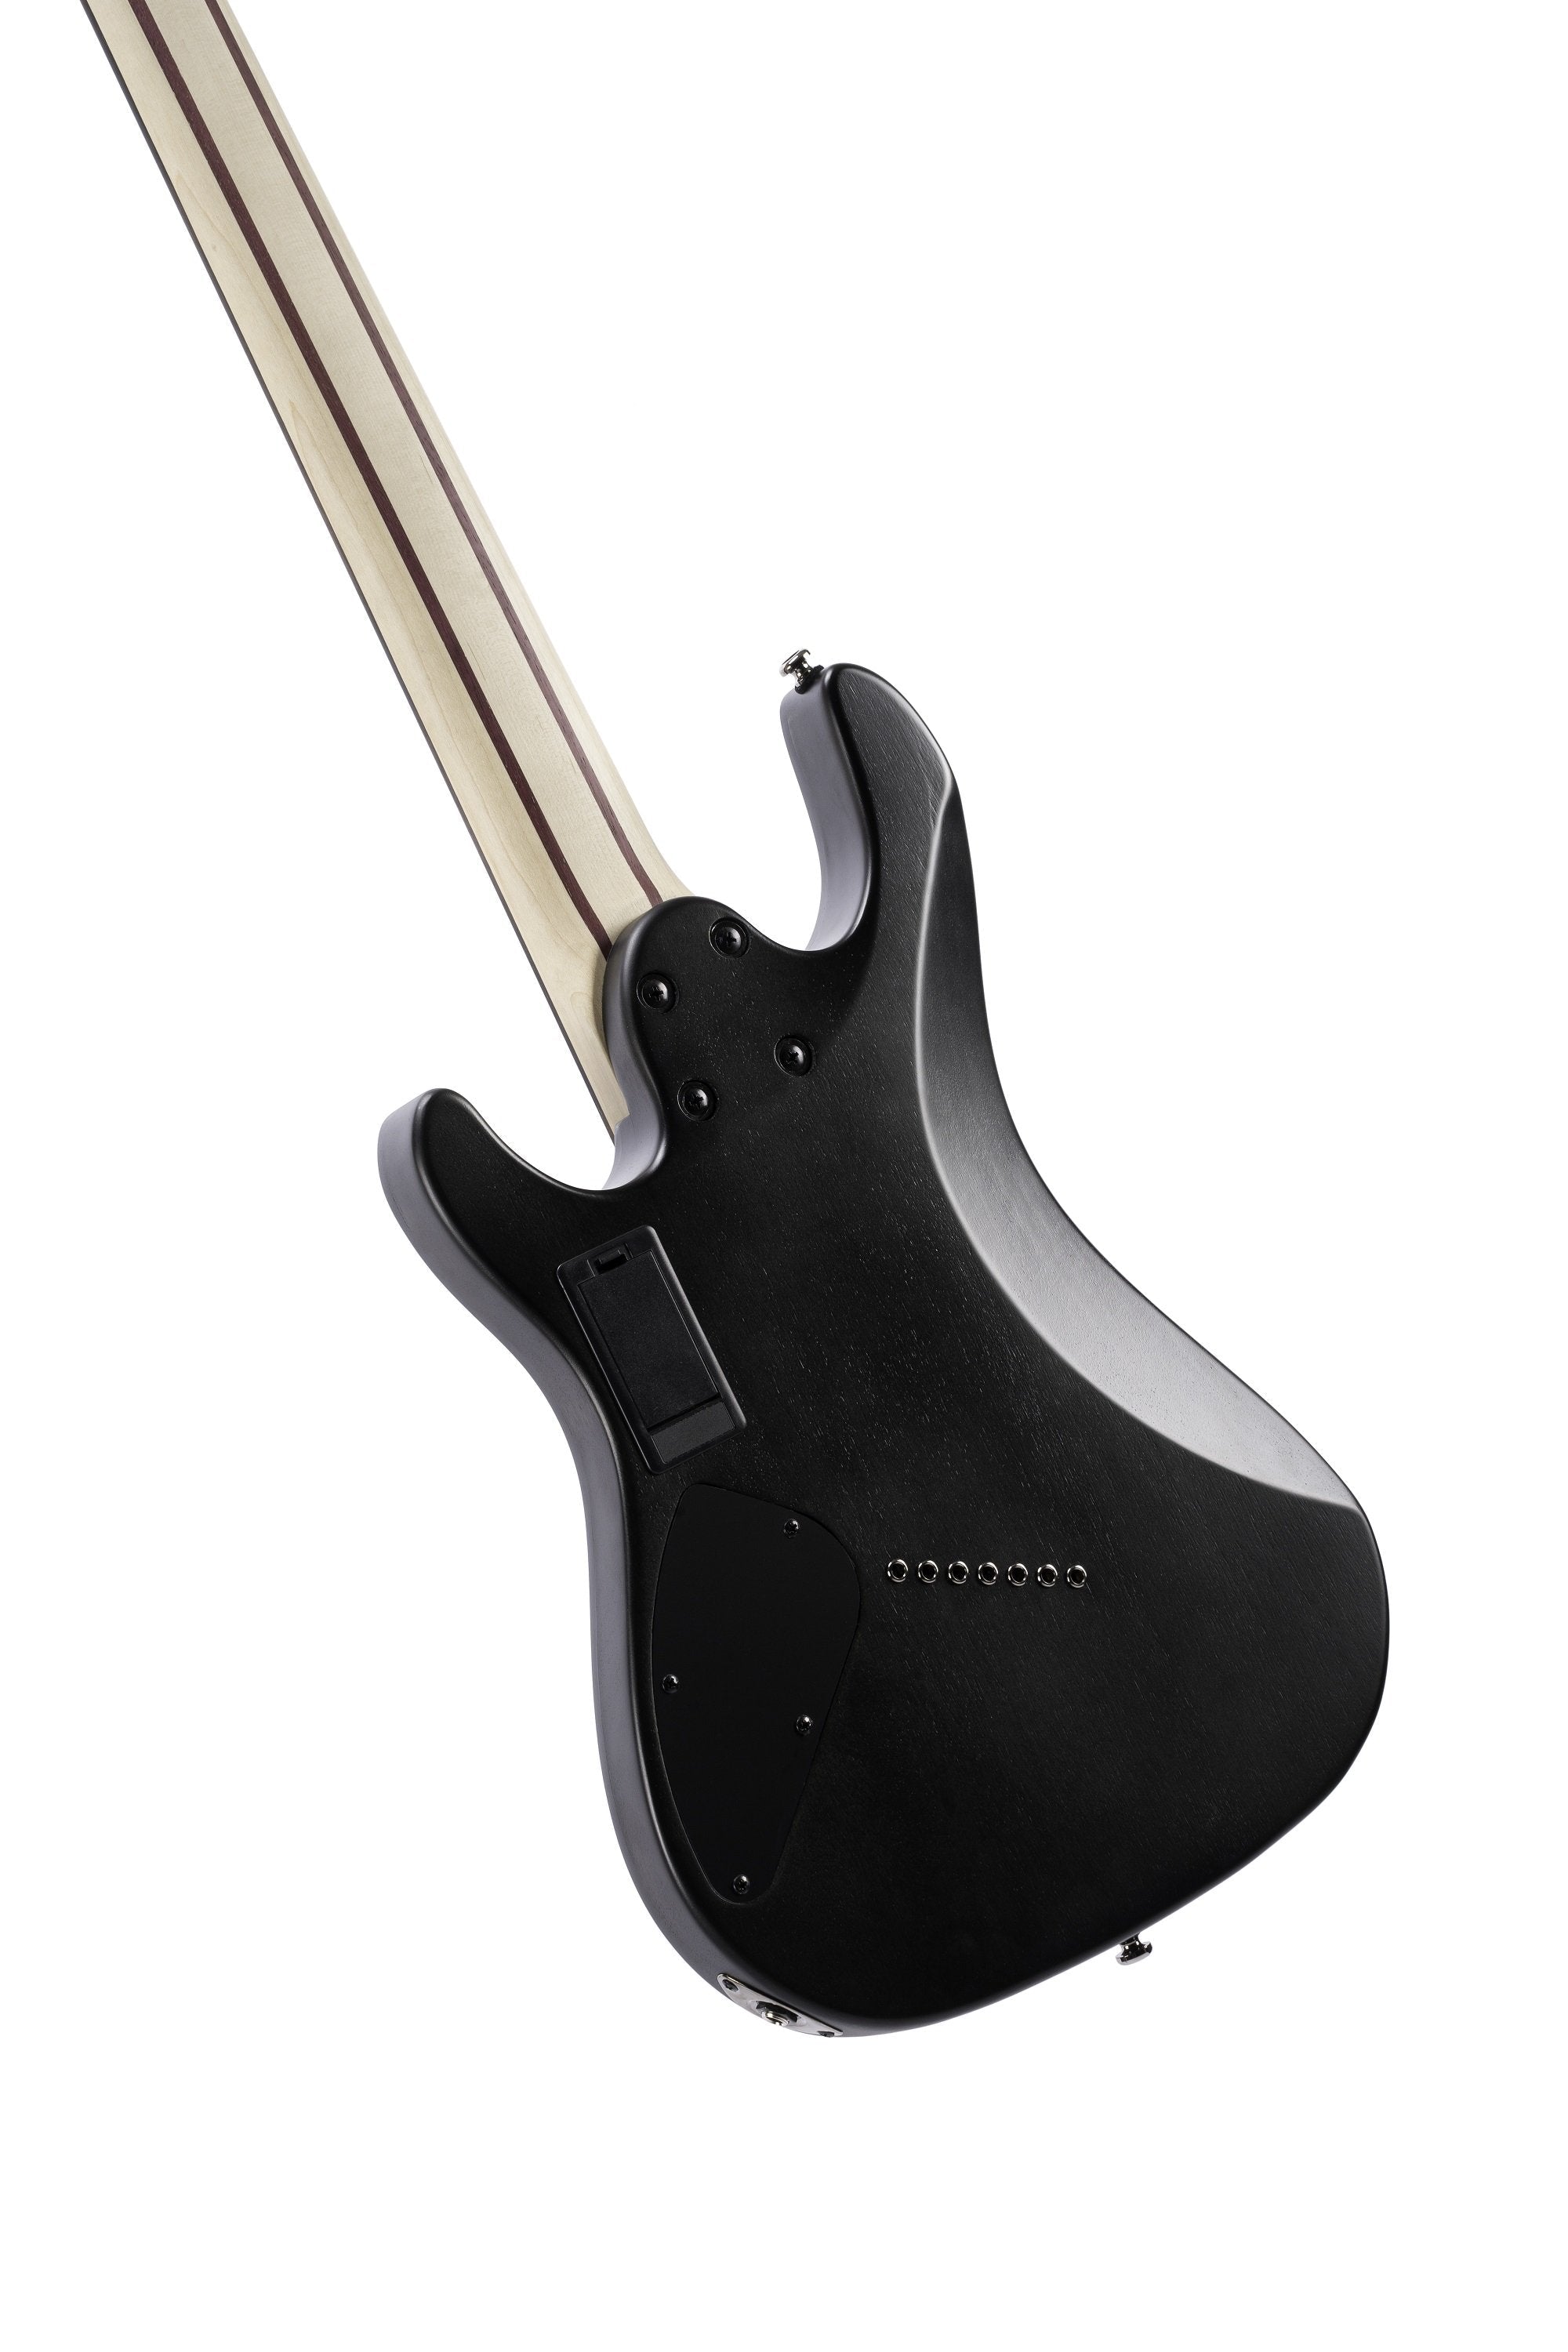 Cort KX507MS Stardust Black, Electric Guitar for sale at Richards Guitars.